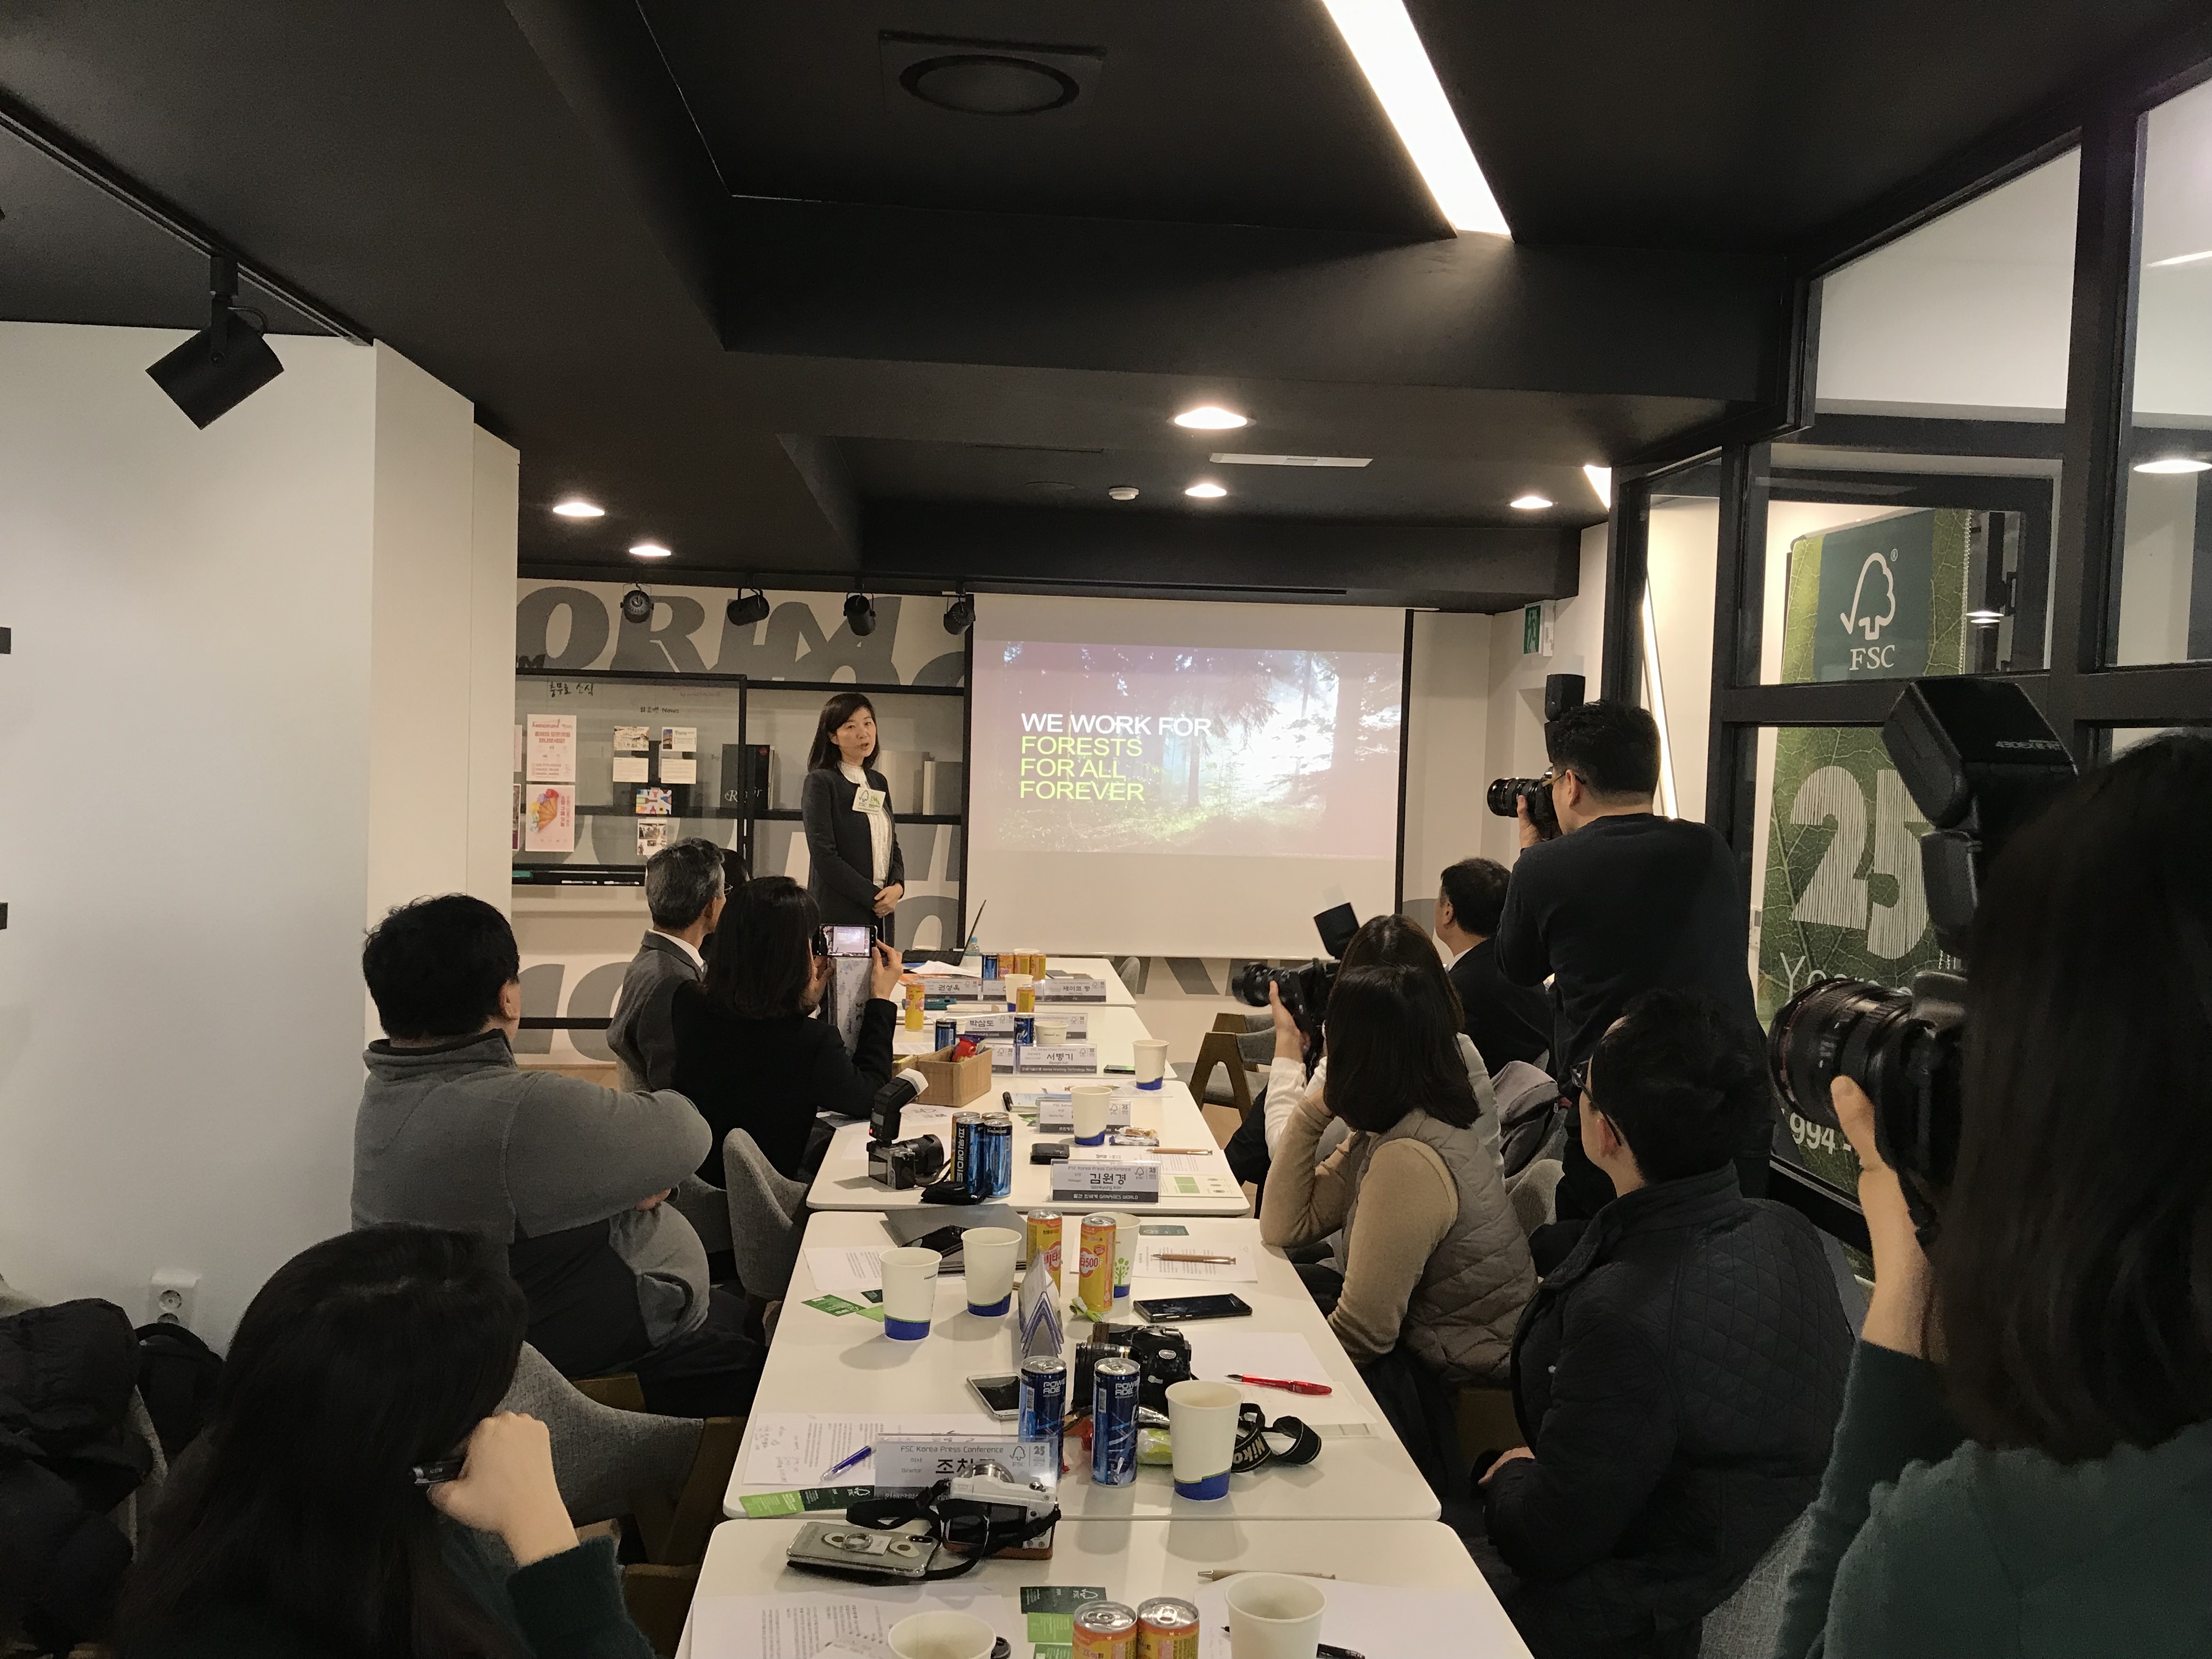 FSC recently opened a new office in Korea